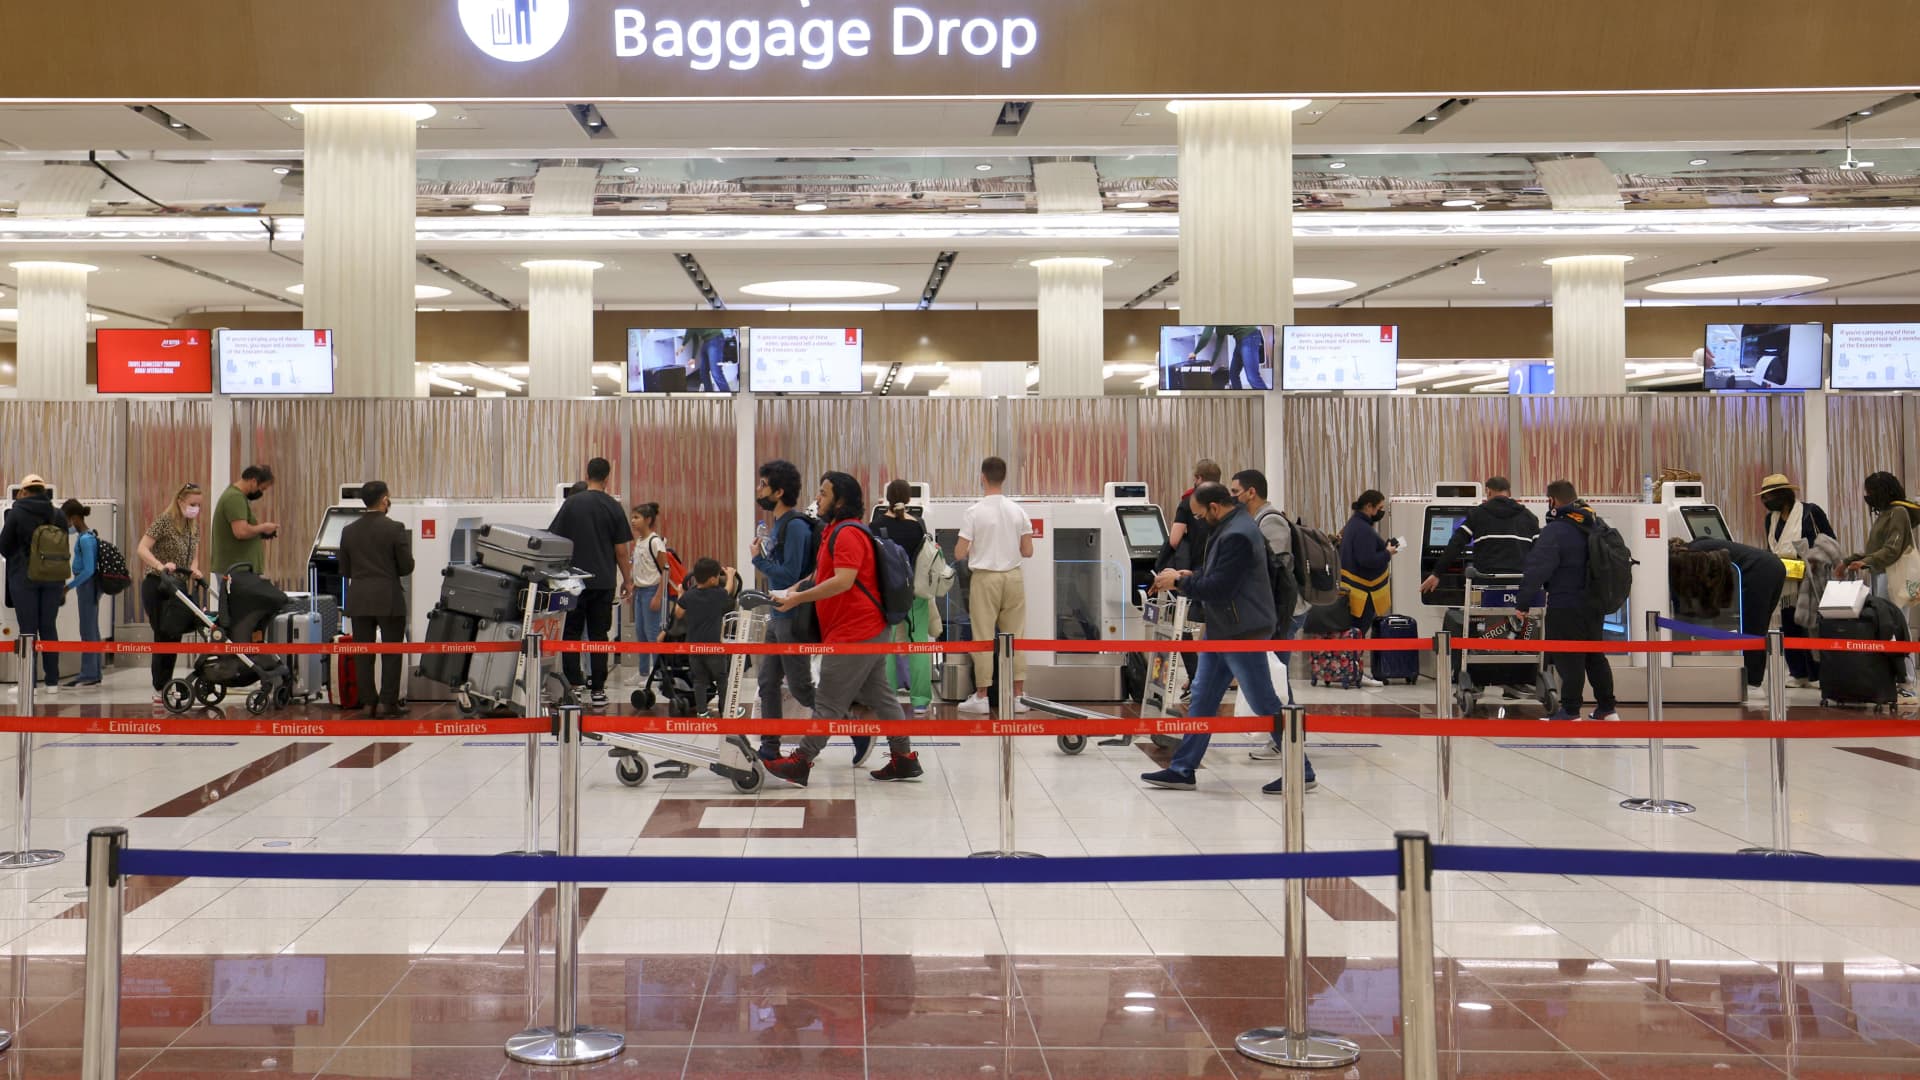 Dubai Airports passenger traffic may reach pre-Covid levels earlier than expected, CEO says